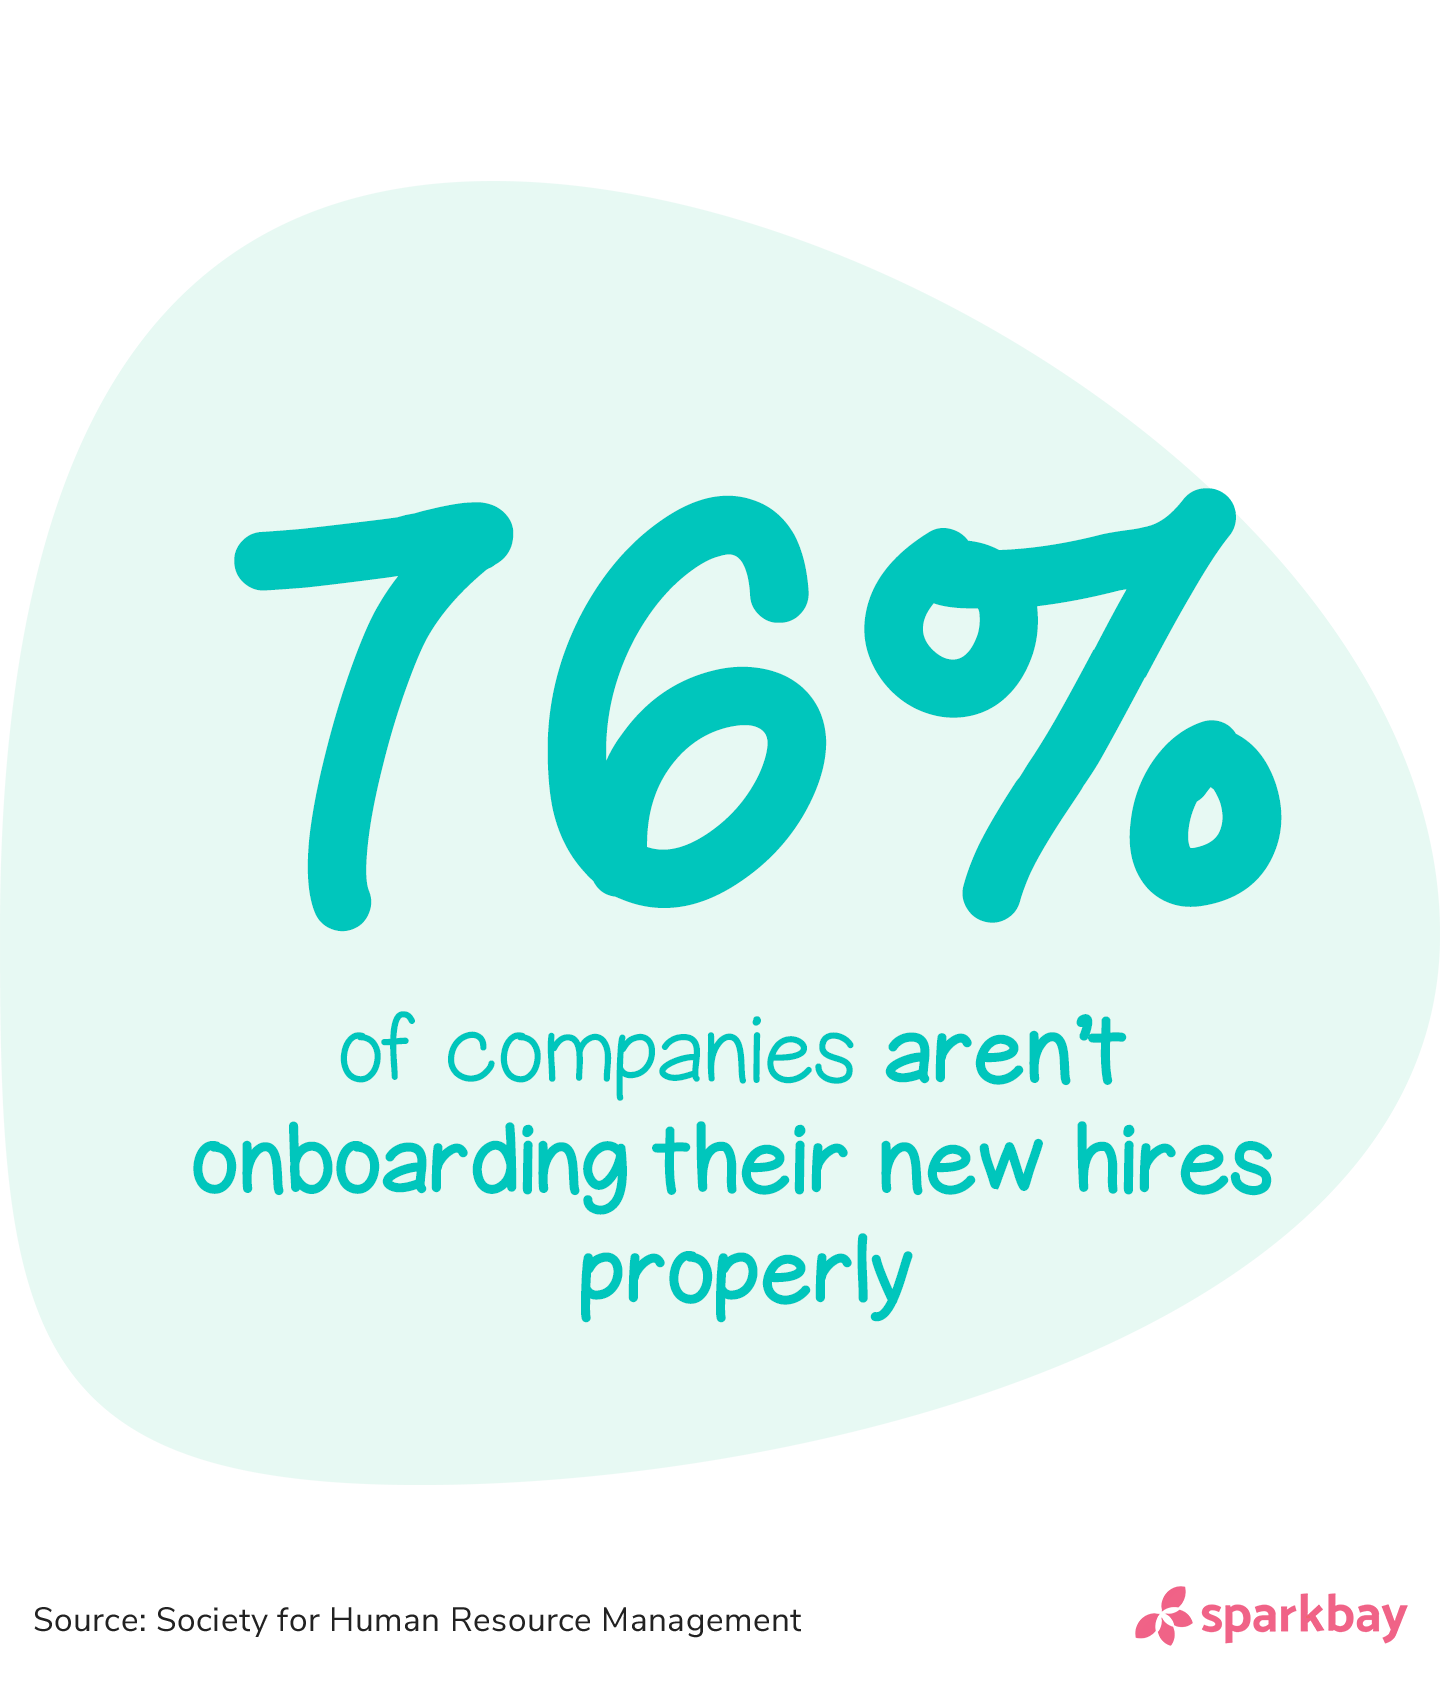 Employee onboarding statistics: 76% of companies aren't onboarding their new hires properly.'